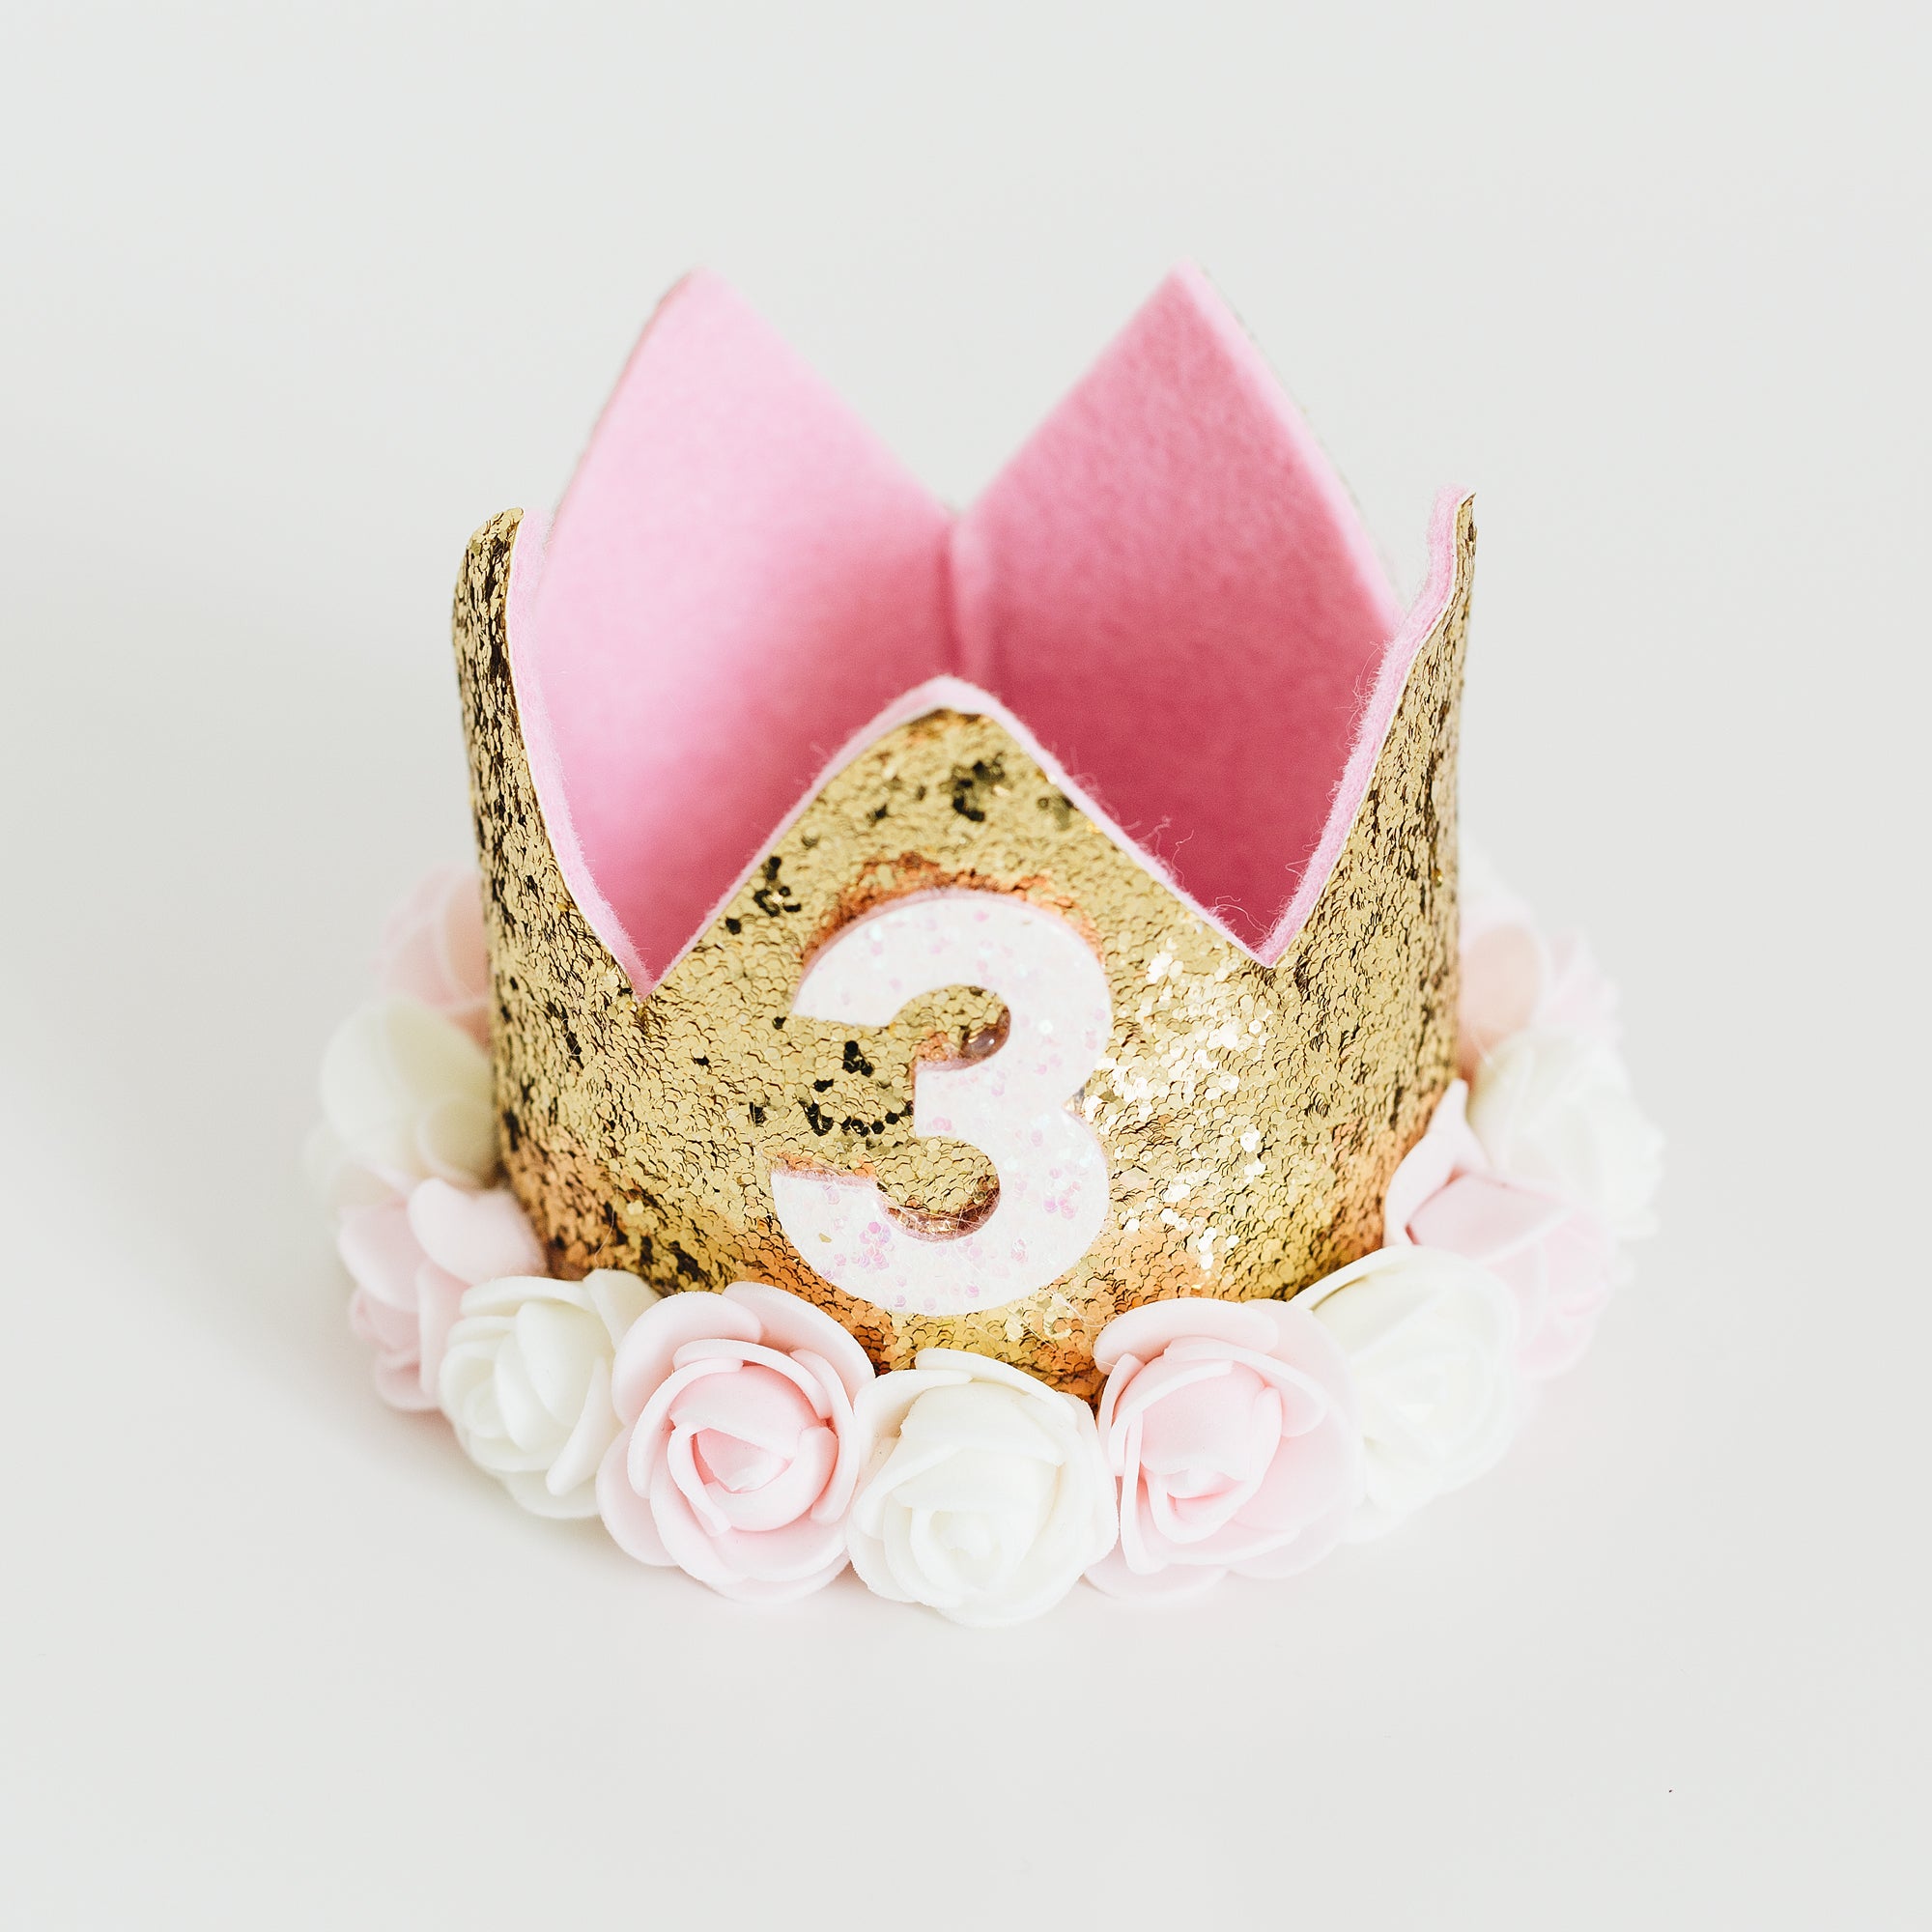 L&S Gold Crown with Pink and White Flowers